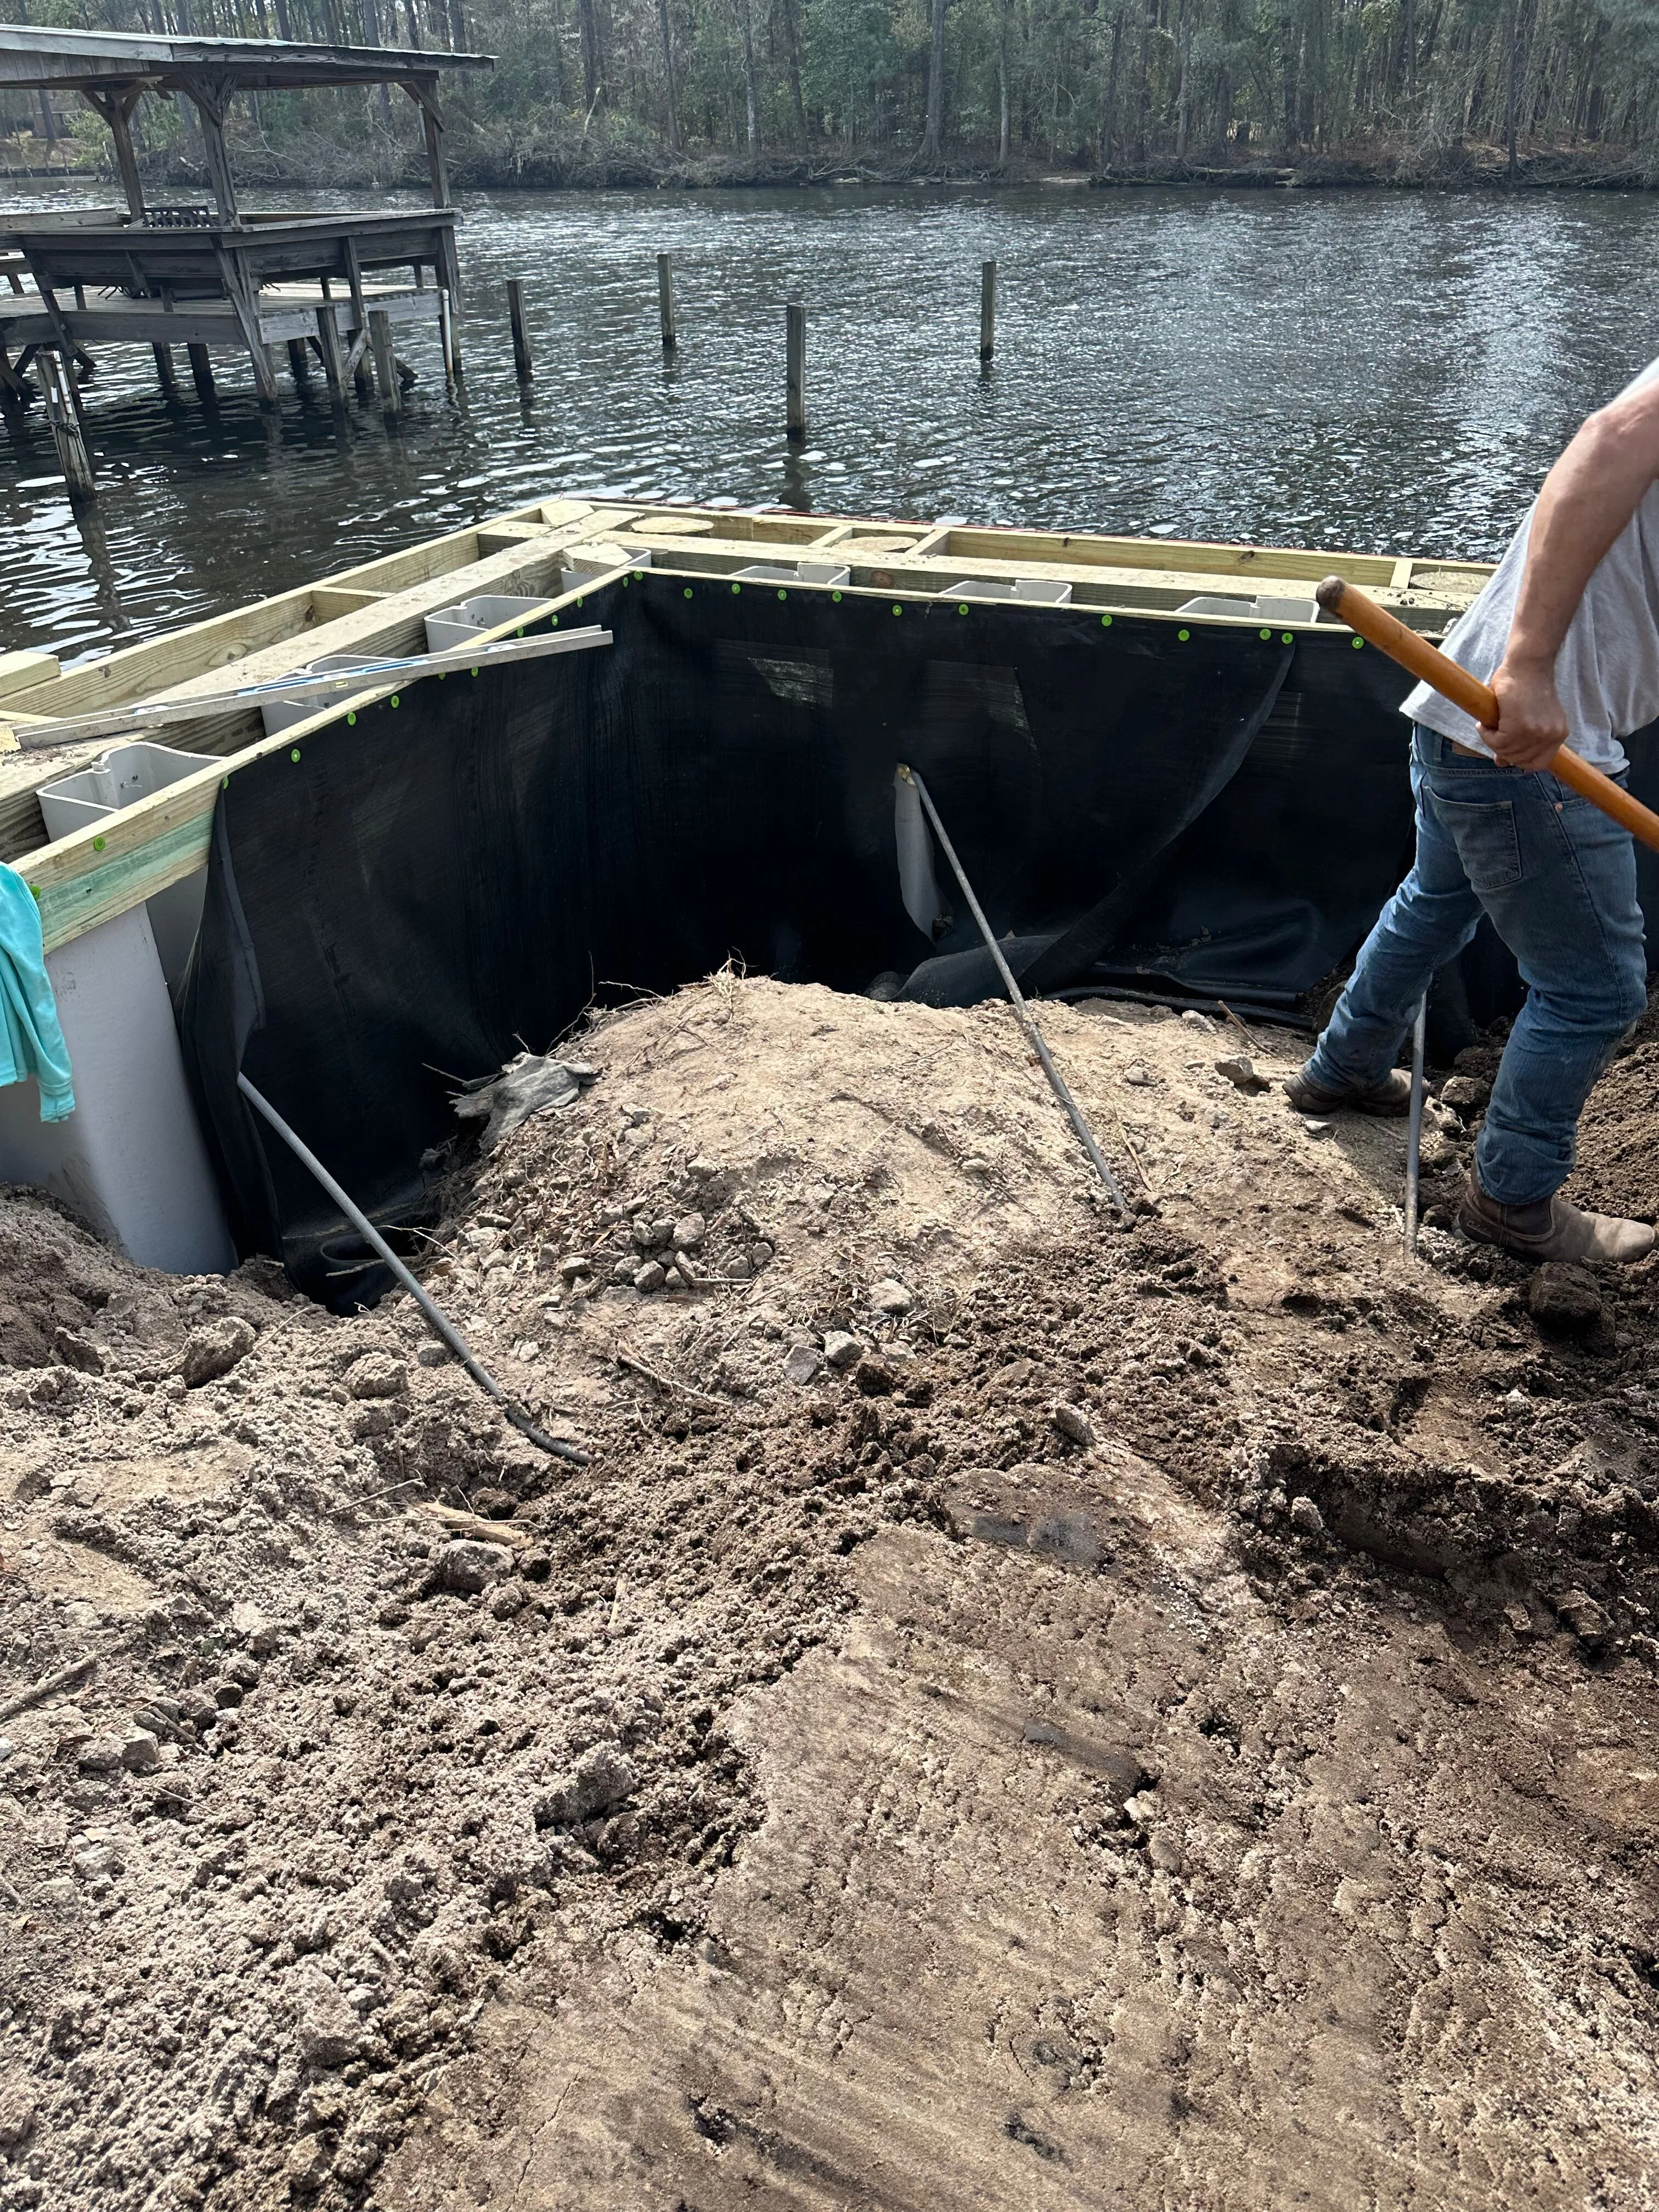 Vinyl Bulkhead framed out for composite wood cap under construction in Myrtle Beach SC on the Intracoastal Waterway built by Waterbridge Contractors of the Carolinas